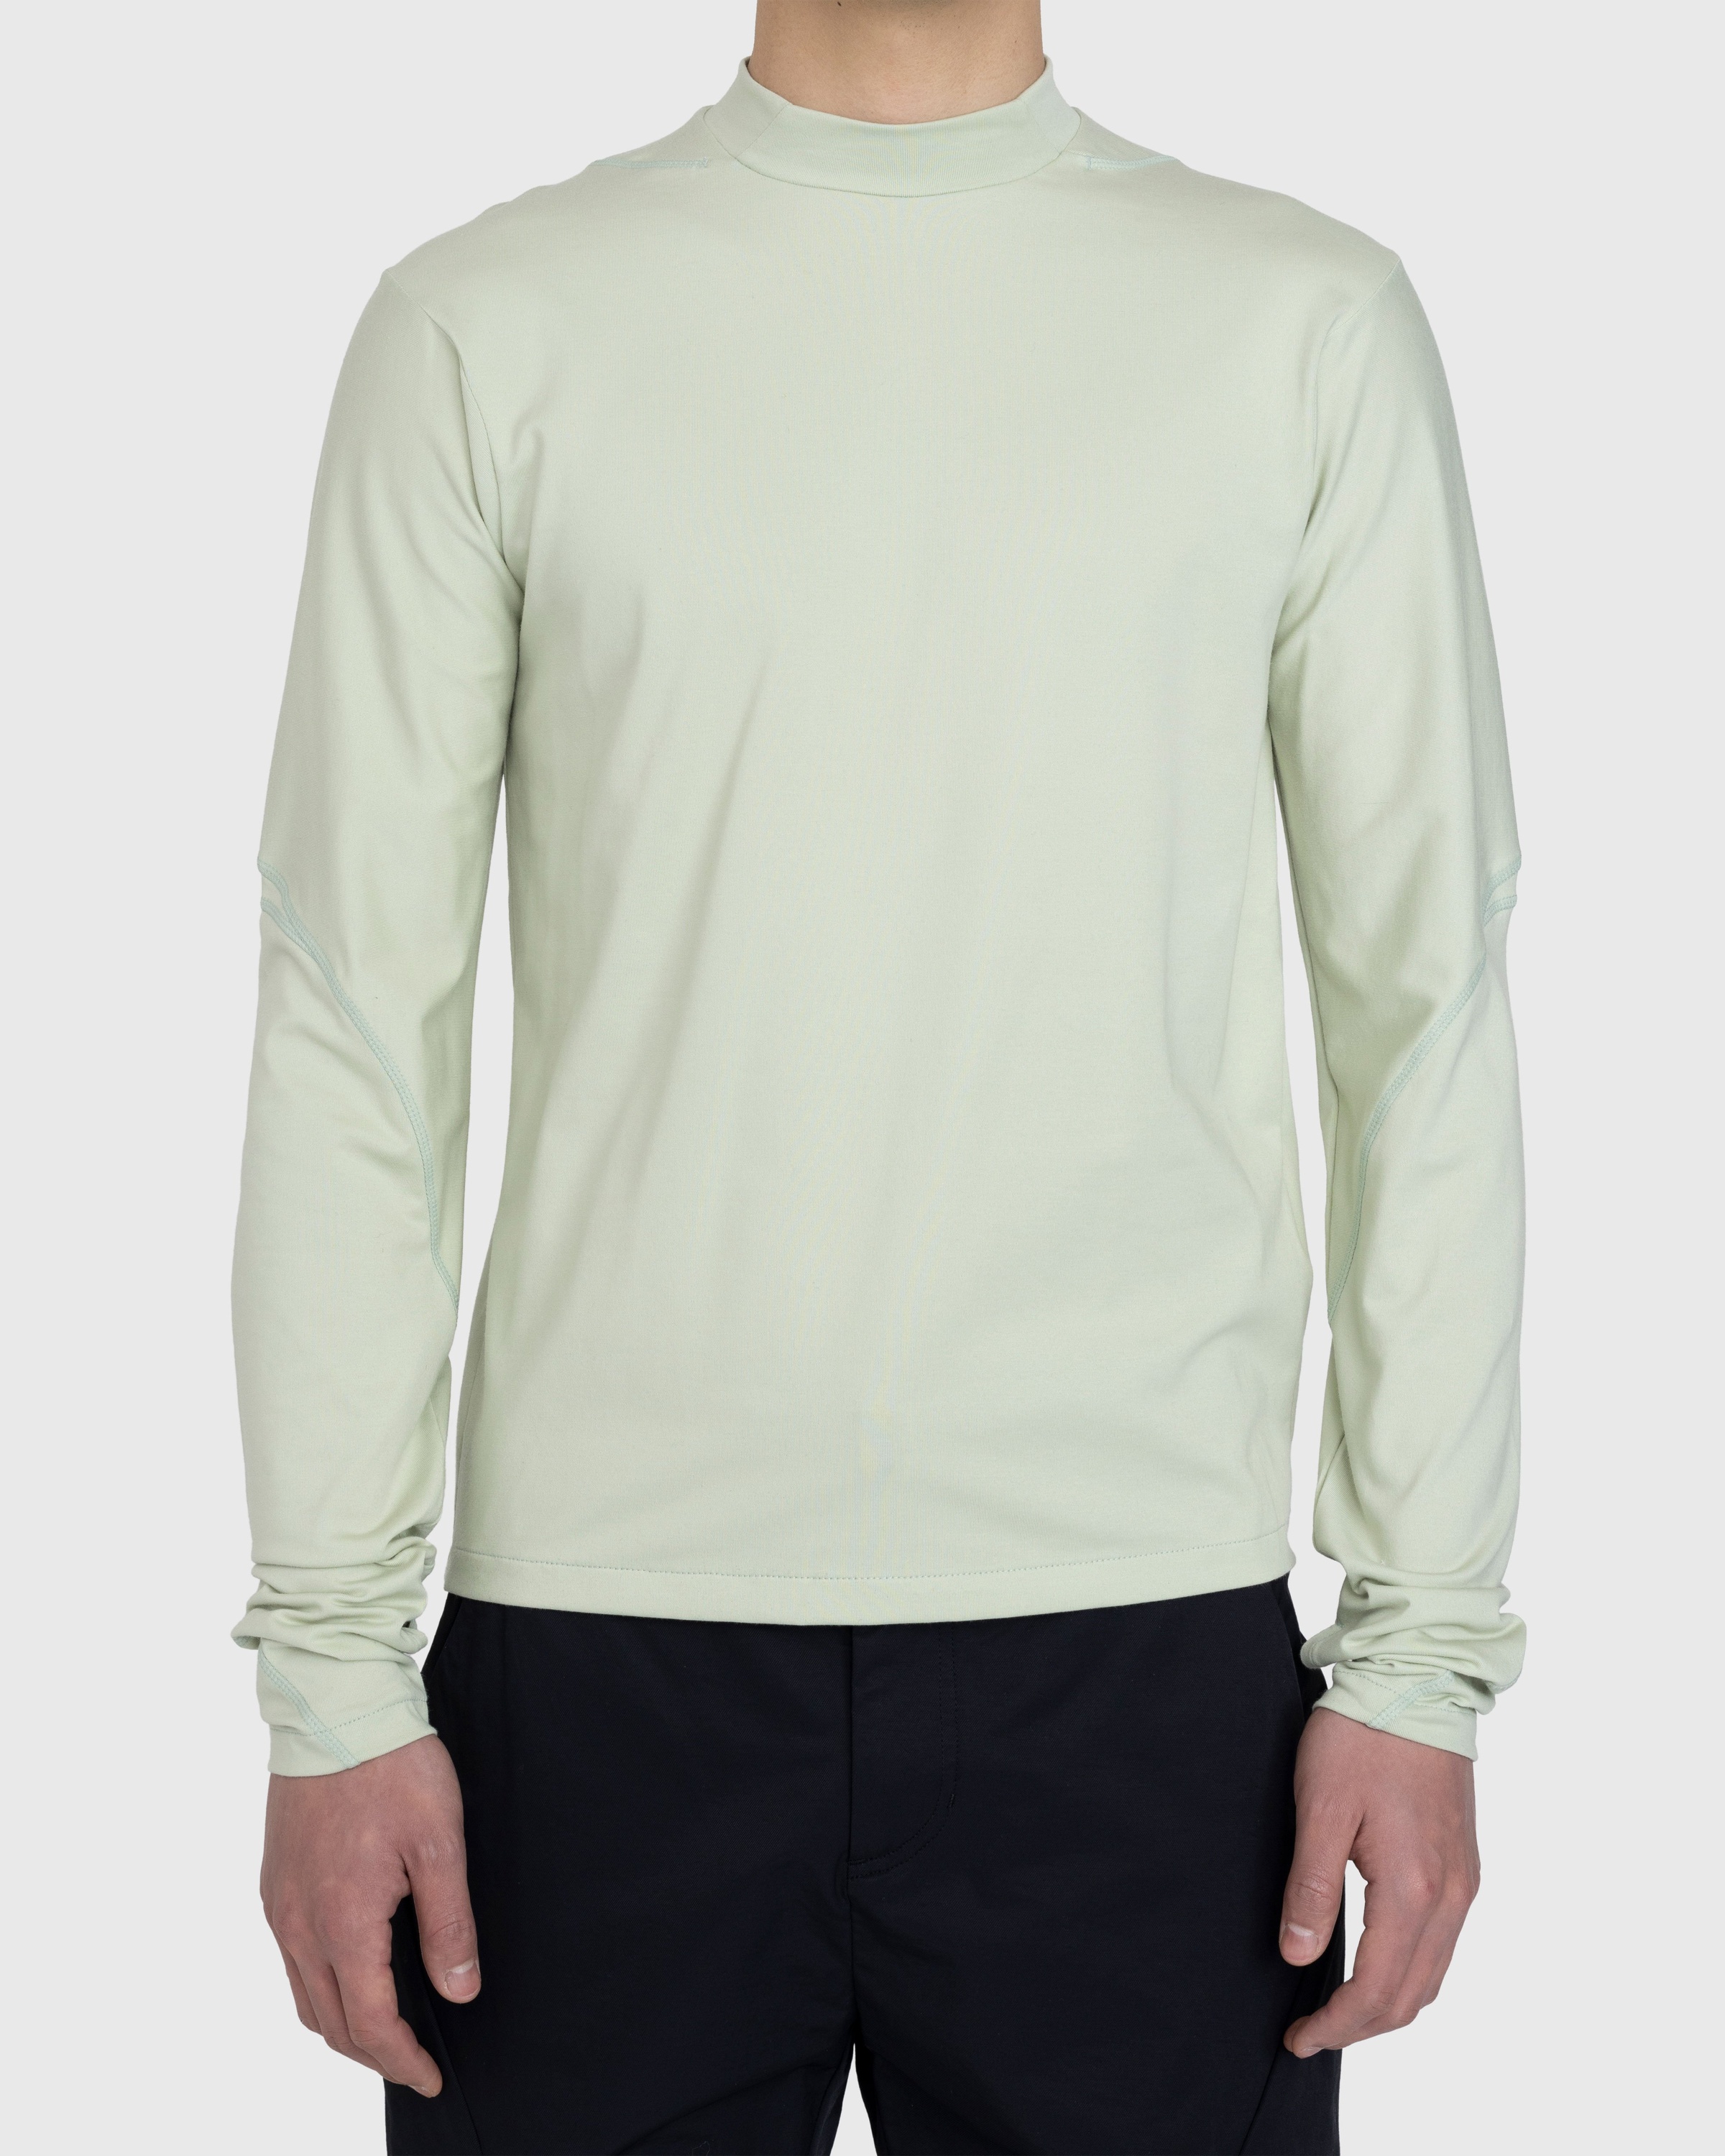 Post Archive Faction (PAF) – 5.0 Longsleeve Right Shirt Lime - Longsleeves - Green - Image 2